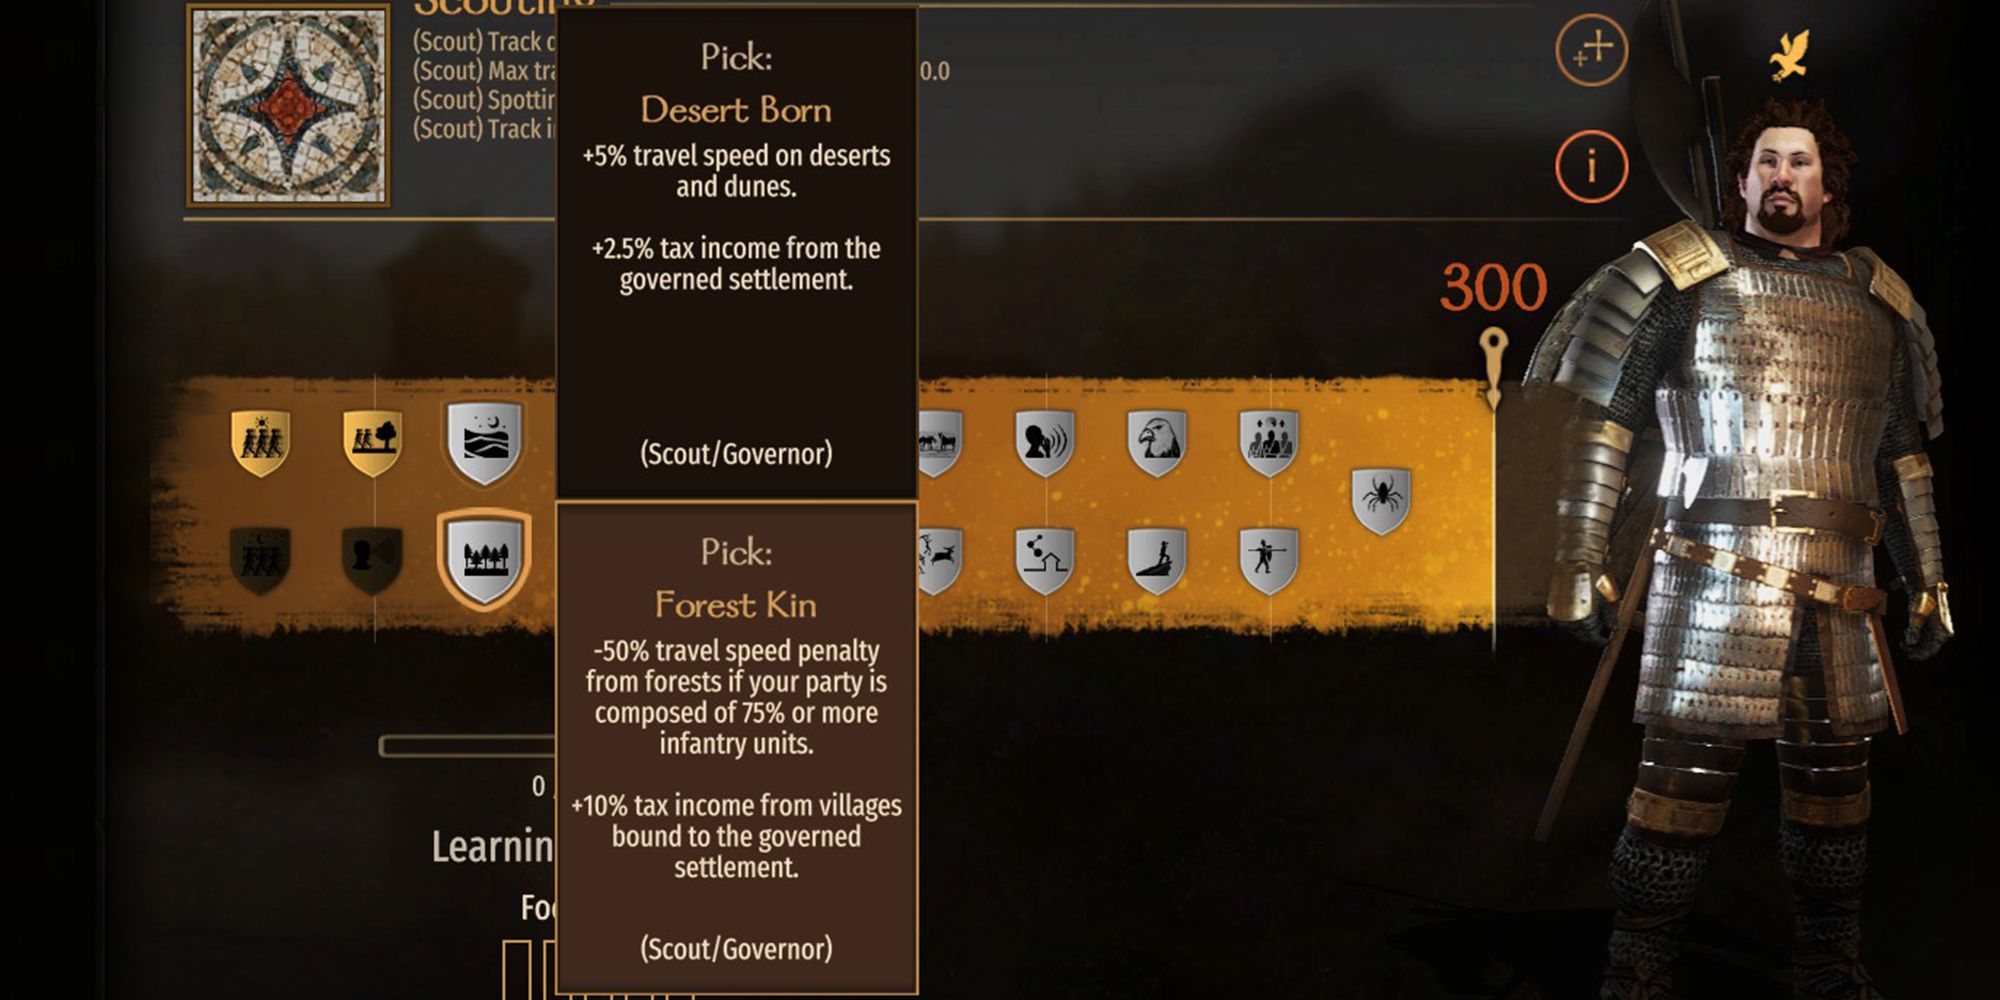 Mount & Blade 2: Bannerlord Forest Kin Perk: -50% movement speed penalty in forest if your party consists of 75% or more infantry units.  +10% tax revenue from villages bound to controlled settlements.